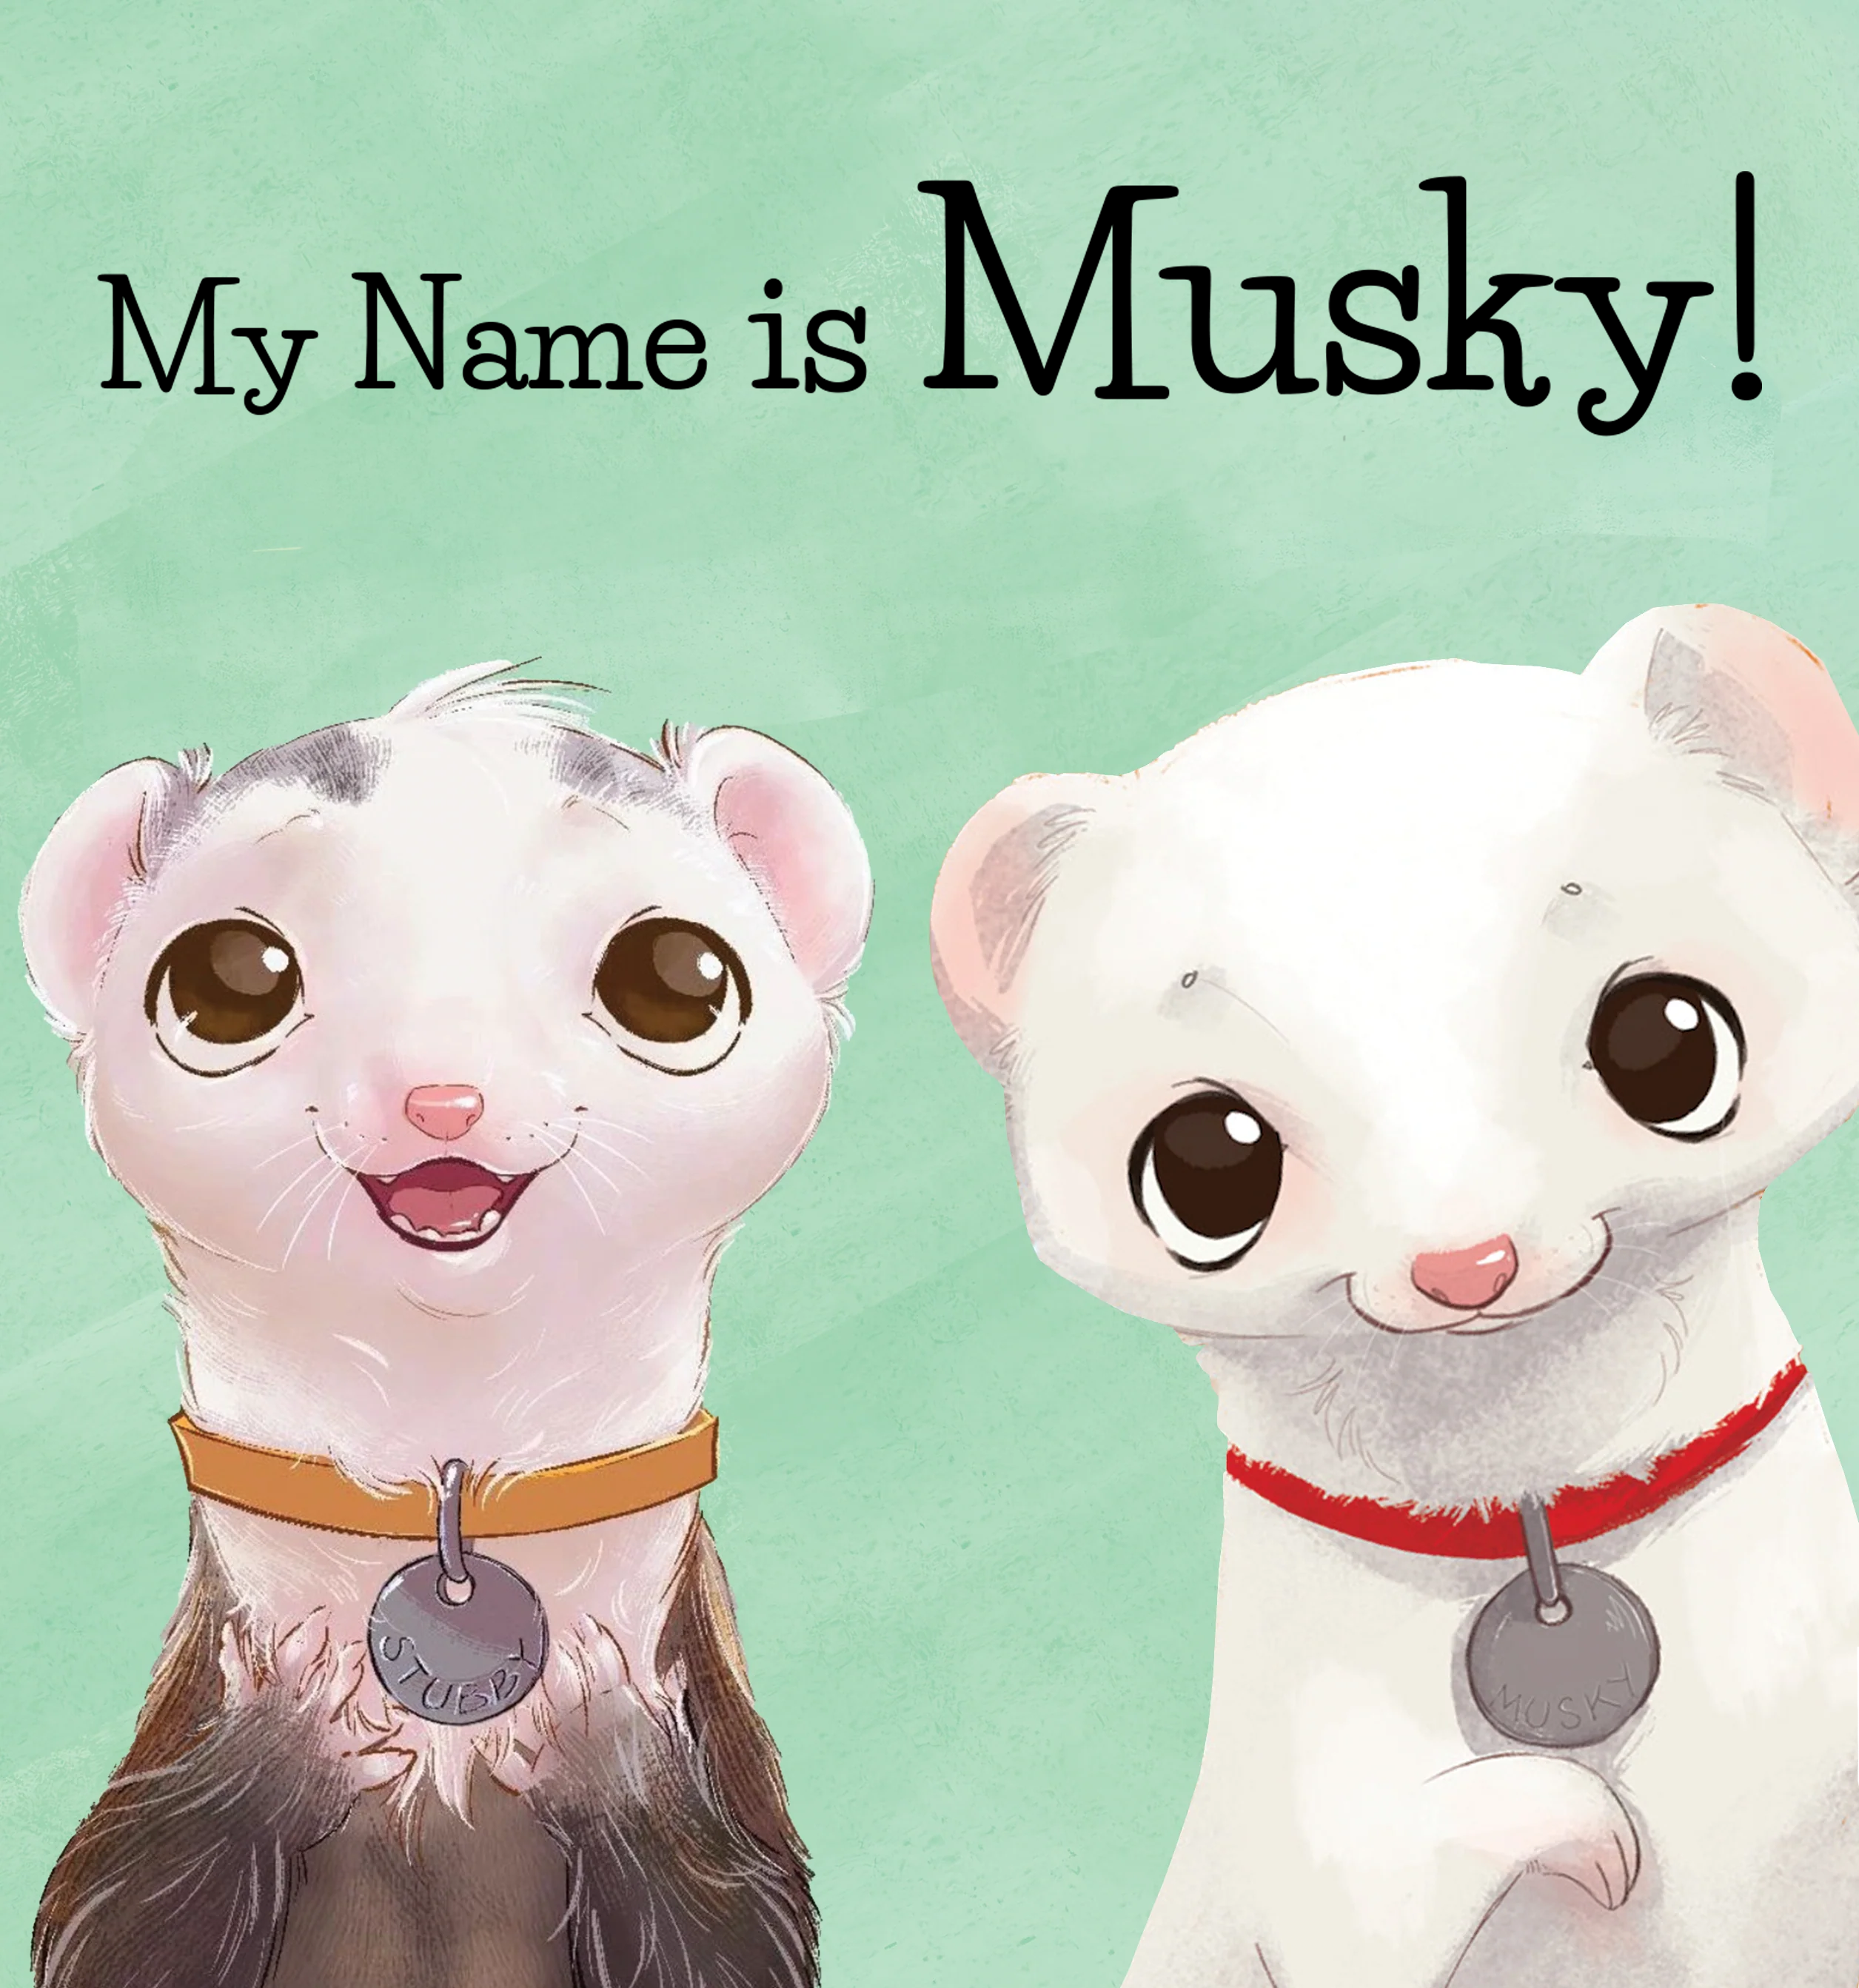 My Name is Musky